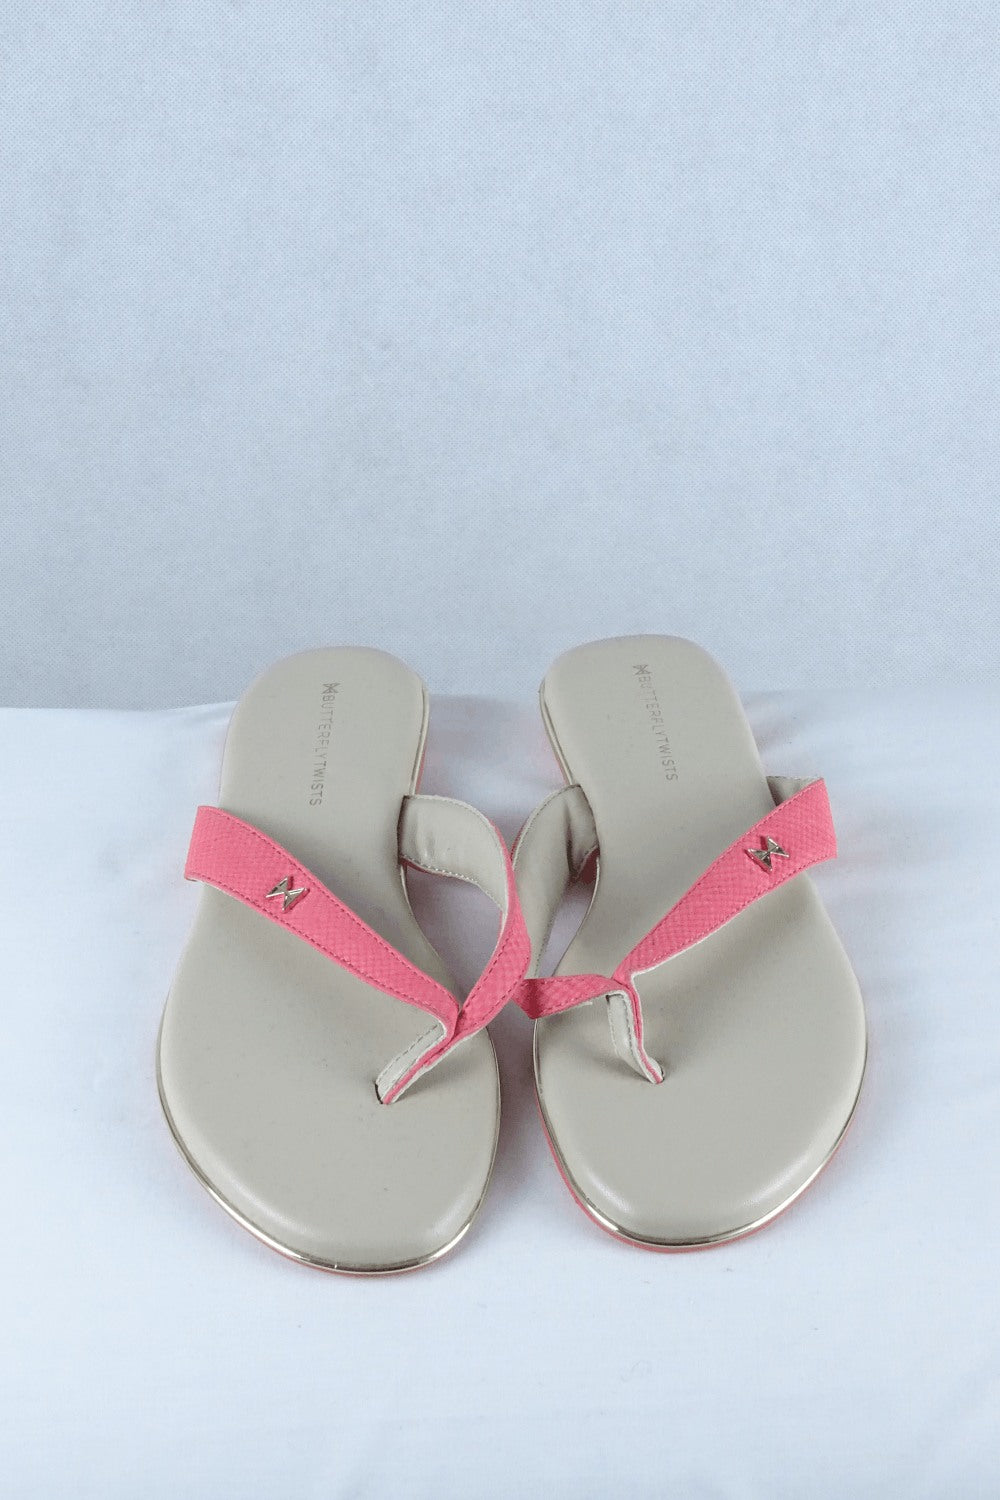 Butterfly Twists Coral Thongs 9.5 AU